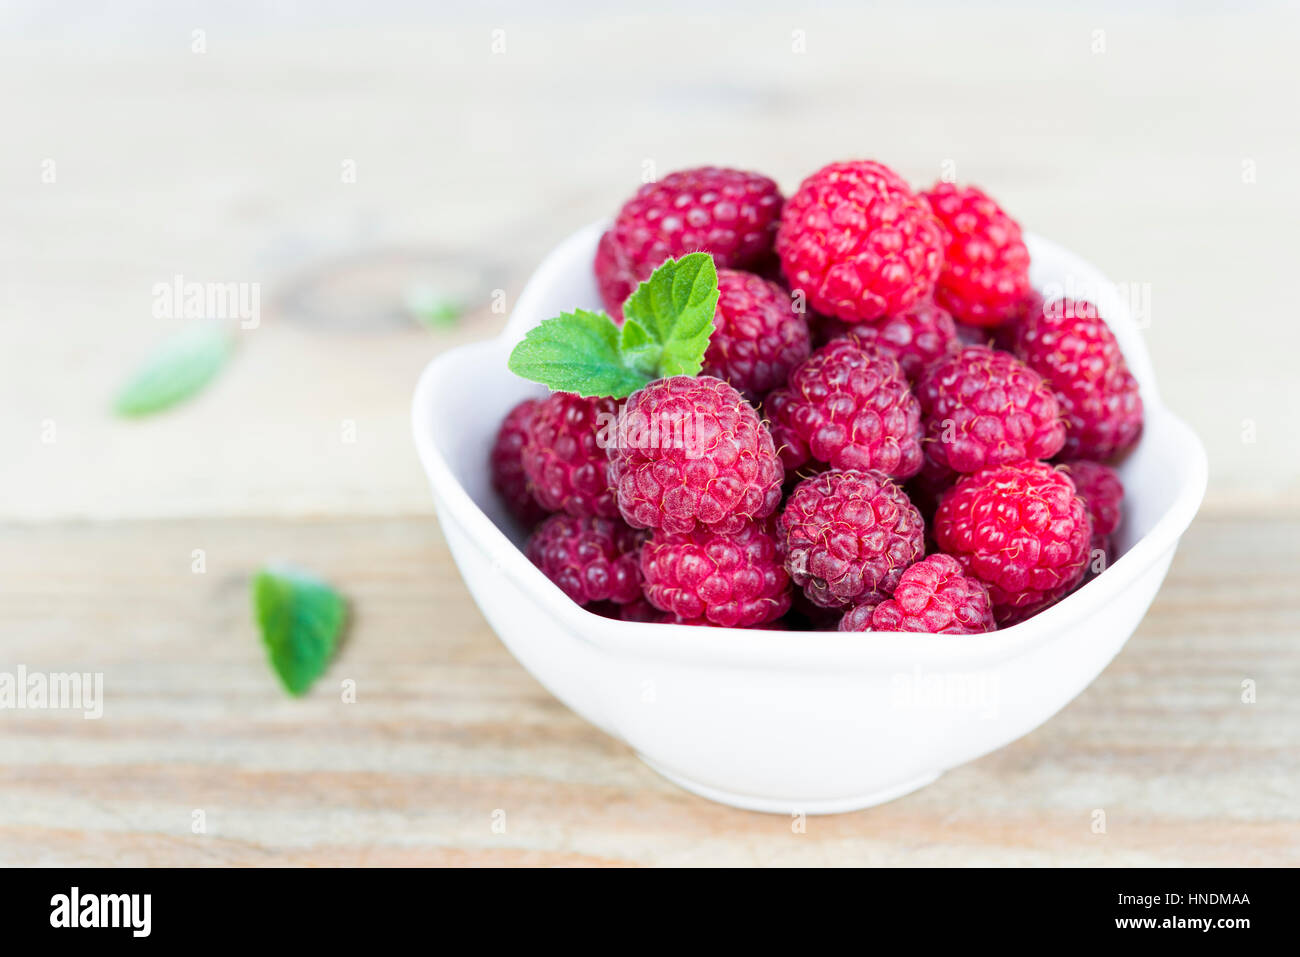 Close-up of fresh raspberry fruits in a white bowl on wooden table with copy space. Stock Photo